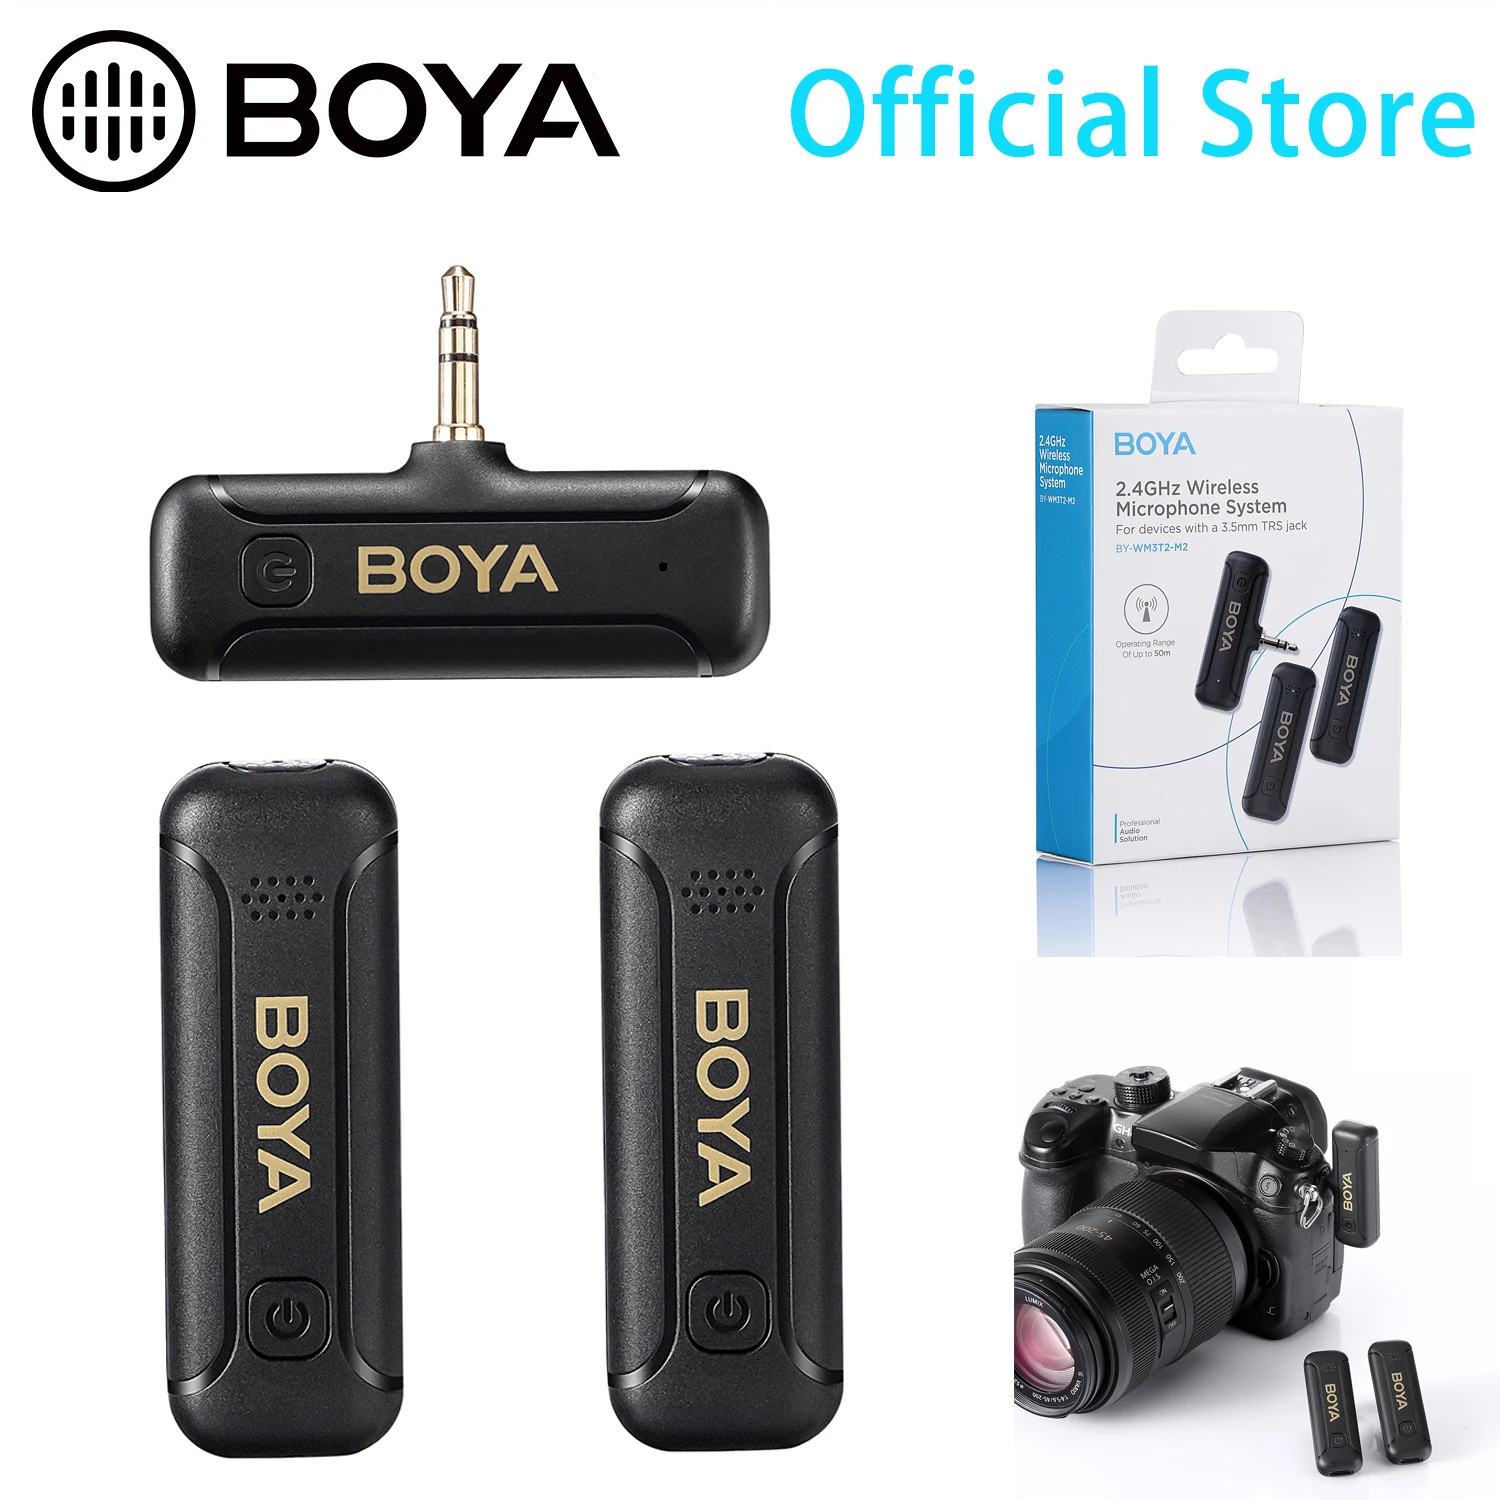 BOYA WM3T2 M 3.5mm TRS  Mini Condenser Wireless Lavalier Microphone for DSLRs Cameras Camcorders Youtube Streaming Recording